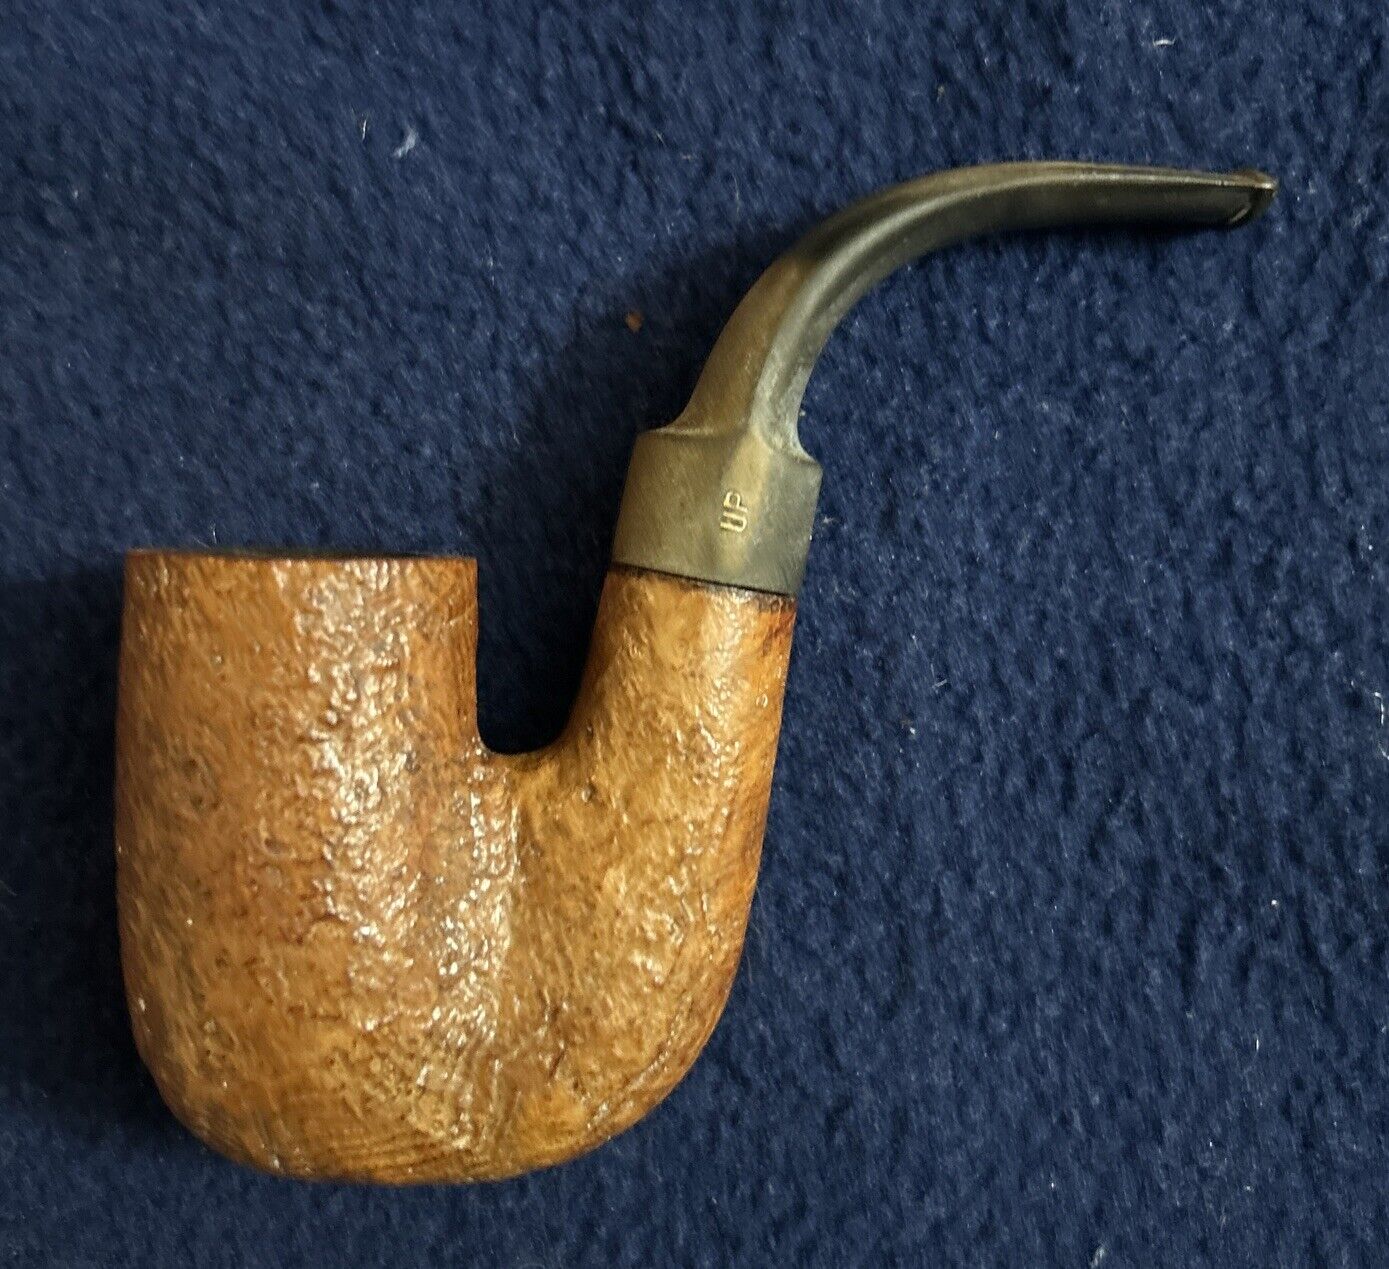 Chunky MACUM 4377 STYLED BY LORENZO Italy Tobacco Pipe